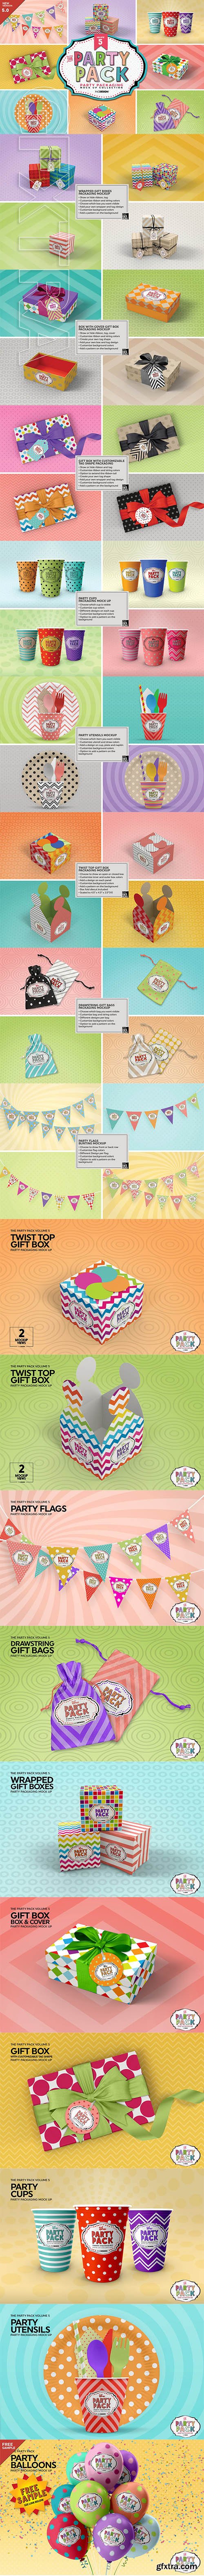 Download Creativemarket Vol 5 Party Packaging Mockups 3733897 Gfxtra Yellowimages Mockups